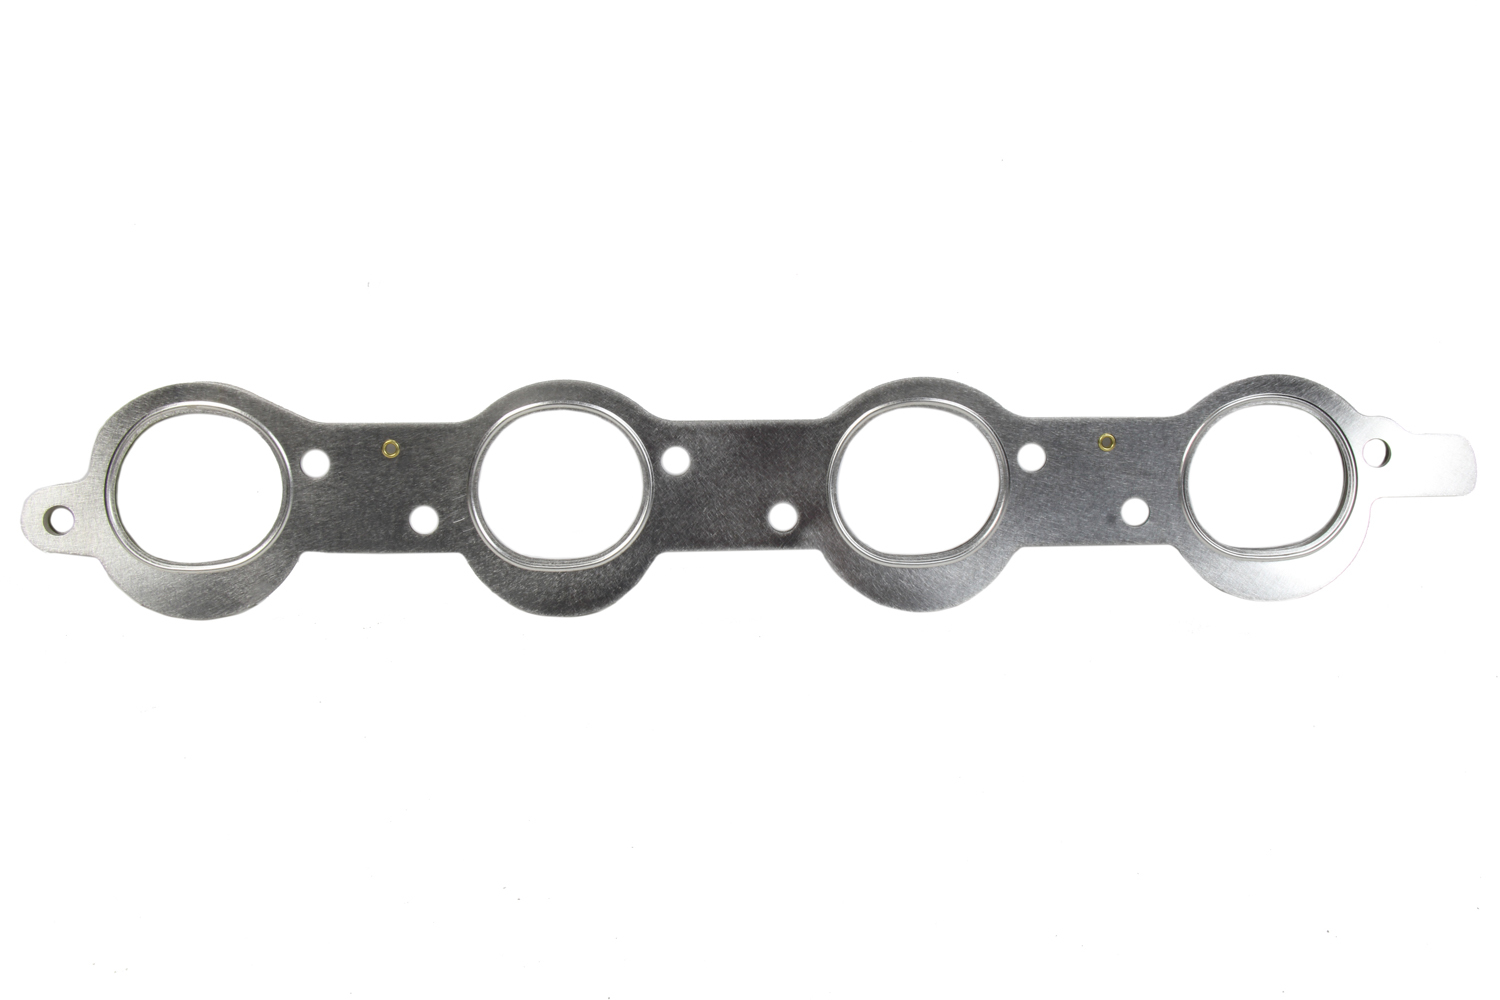 Cometic Gaskets C15443-030 - Exhaust Manifold / Header Gasket, 2.017 x 2.227 in Oval Port, Multi-Layer Steel, AFR Magnum 24 Degree Heads, Big Block Chevy, Each